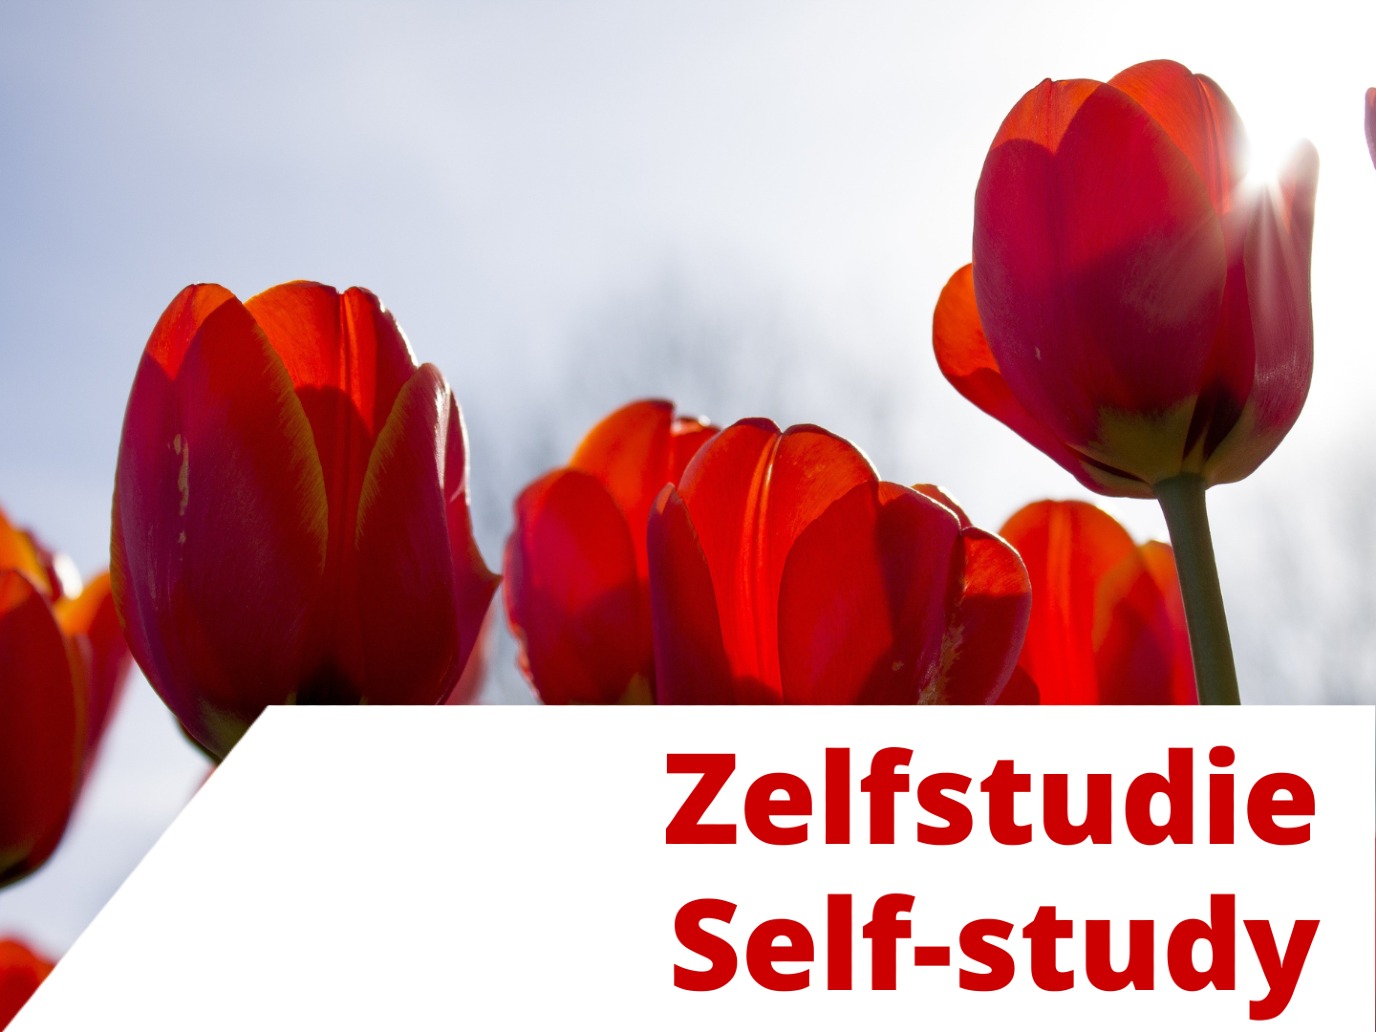 Self-study with online sessions